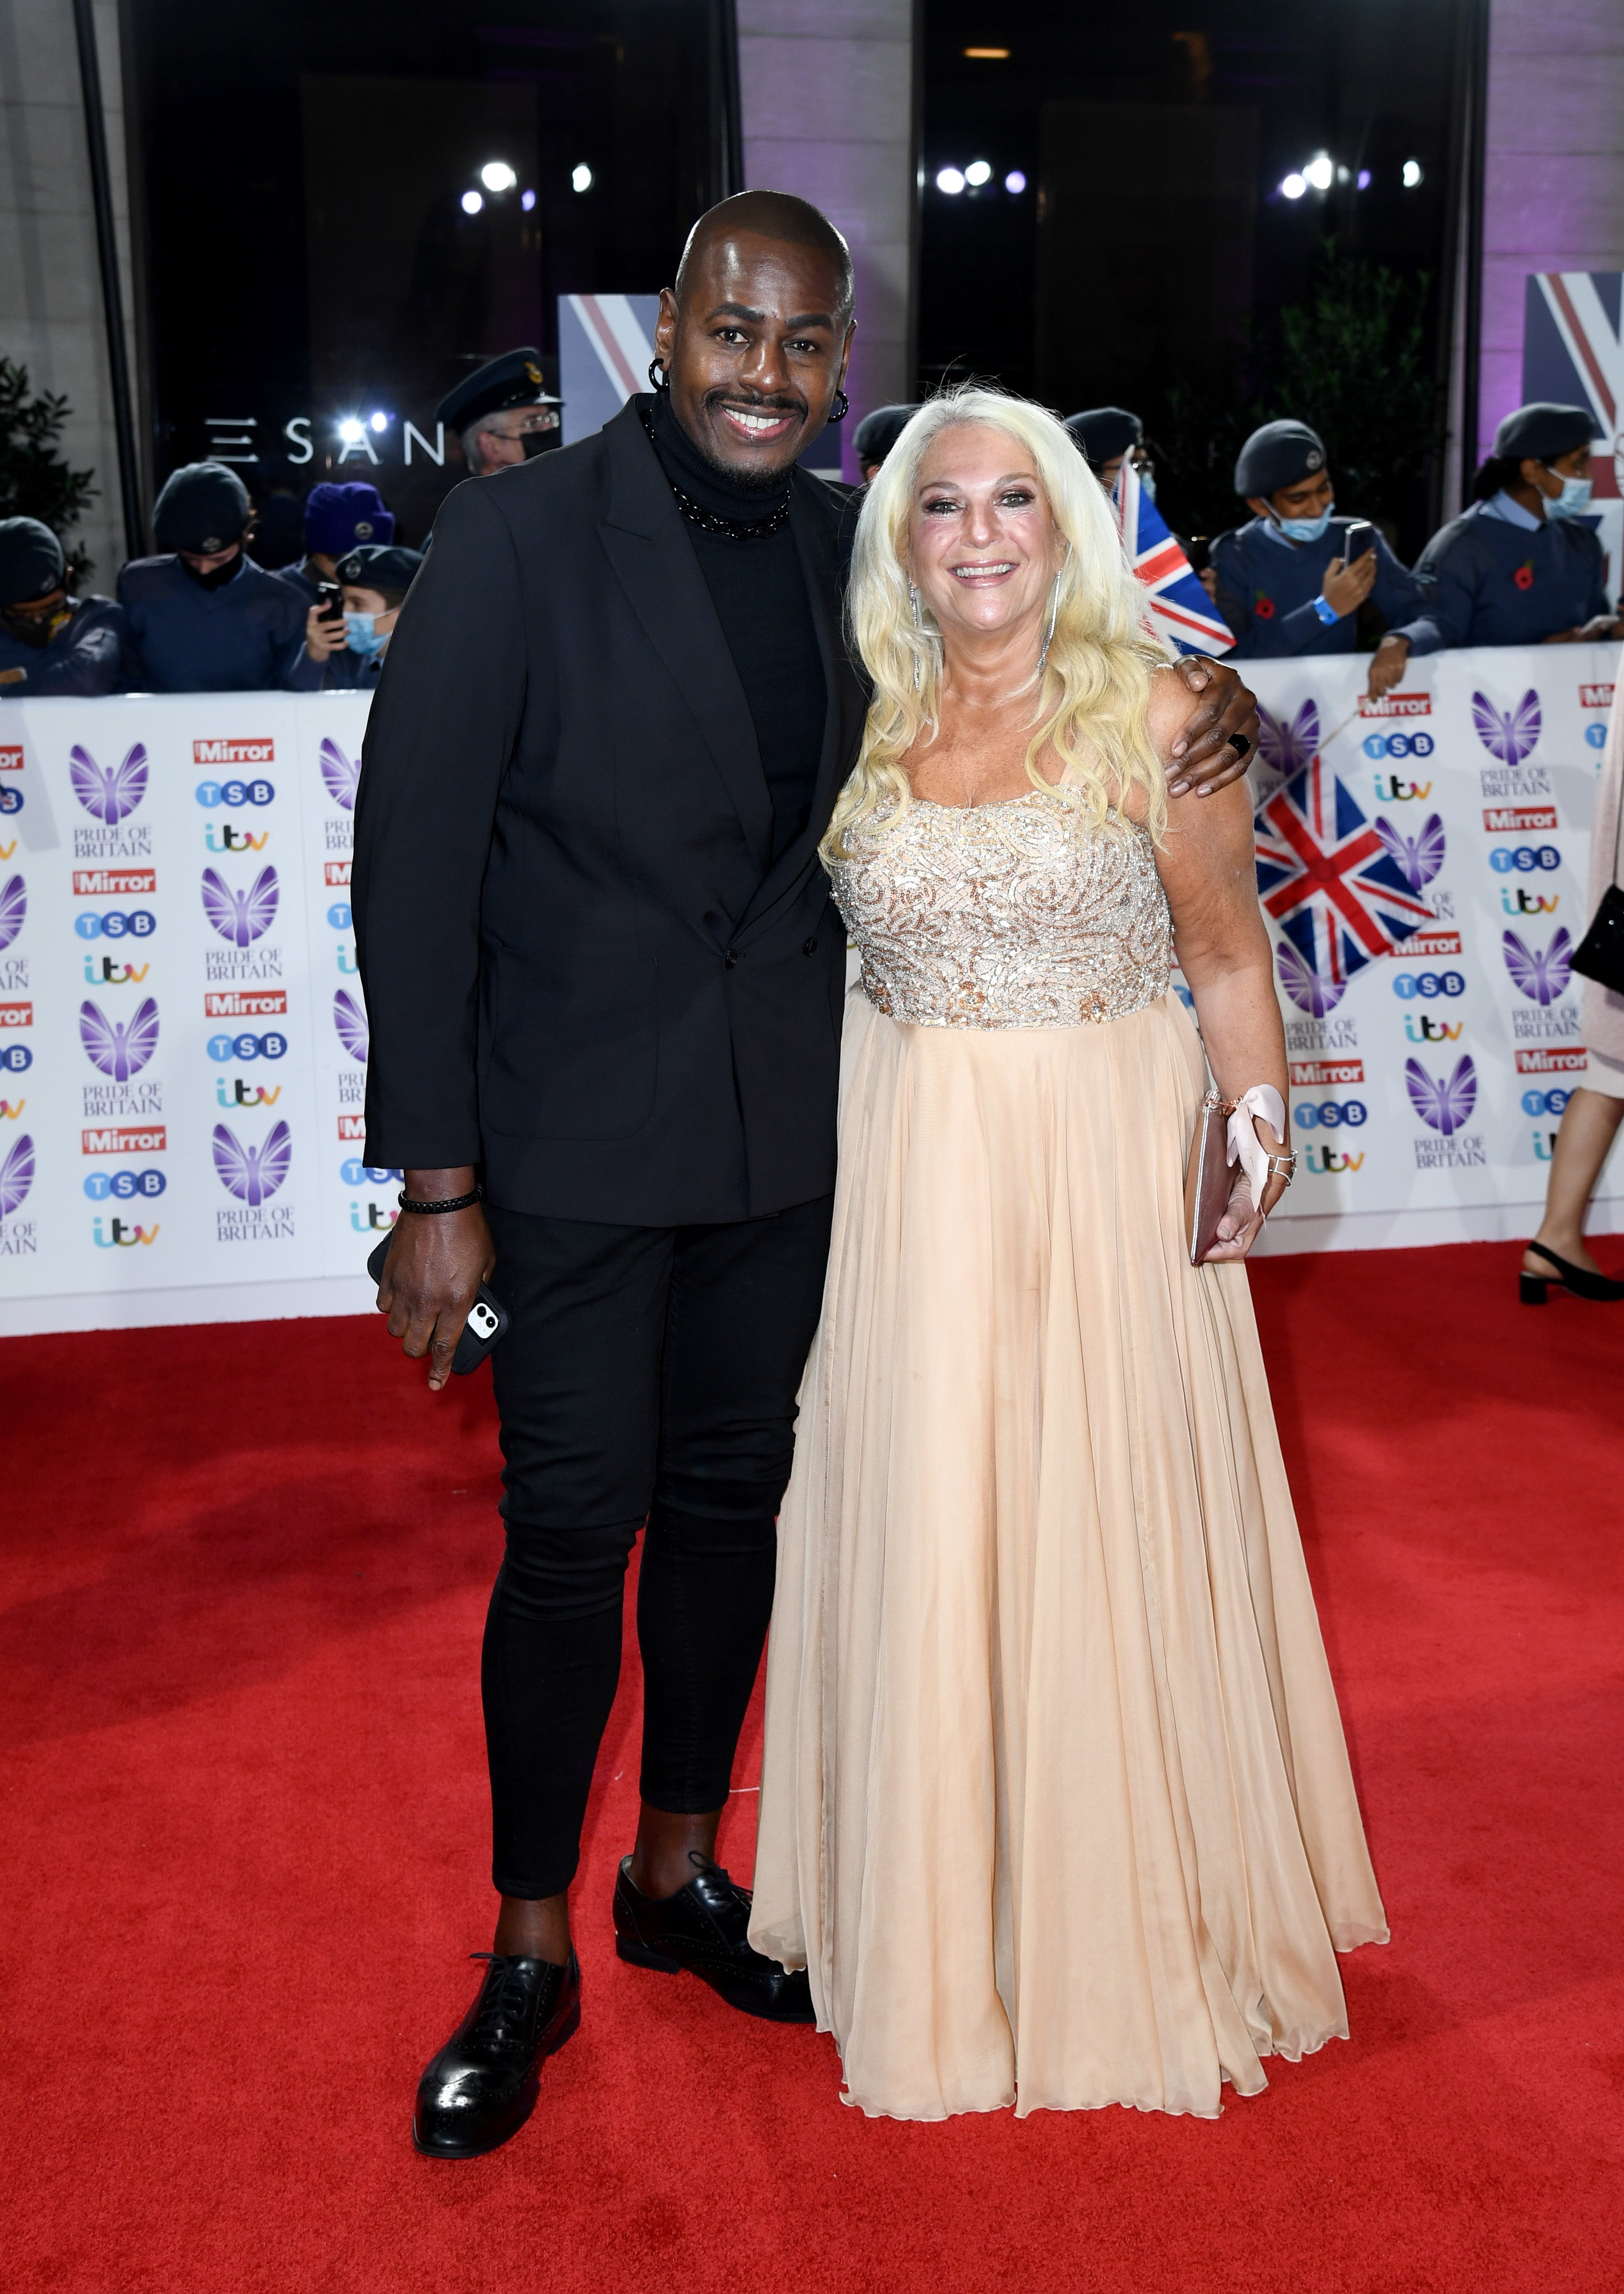 Ben Ofoedu and Vanessa Feltz attend the Pride Of Britain Awards 2021 at The Grosvenor House Hotel on October 30, 2021